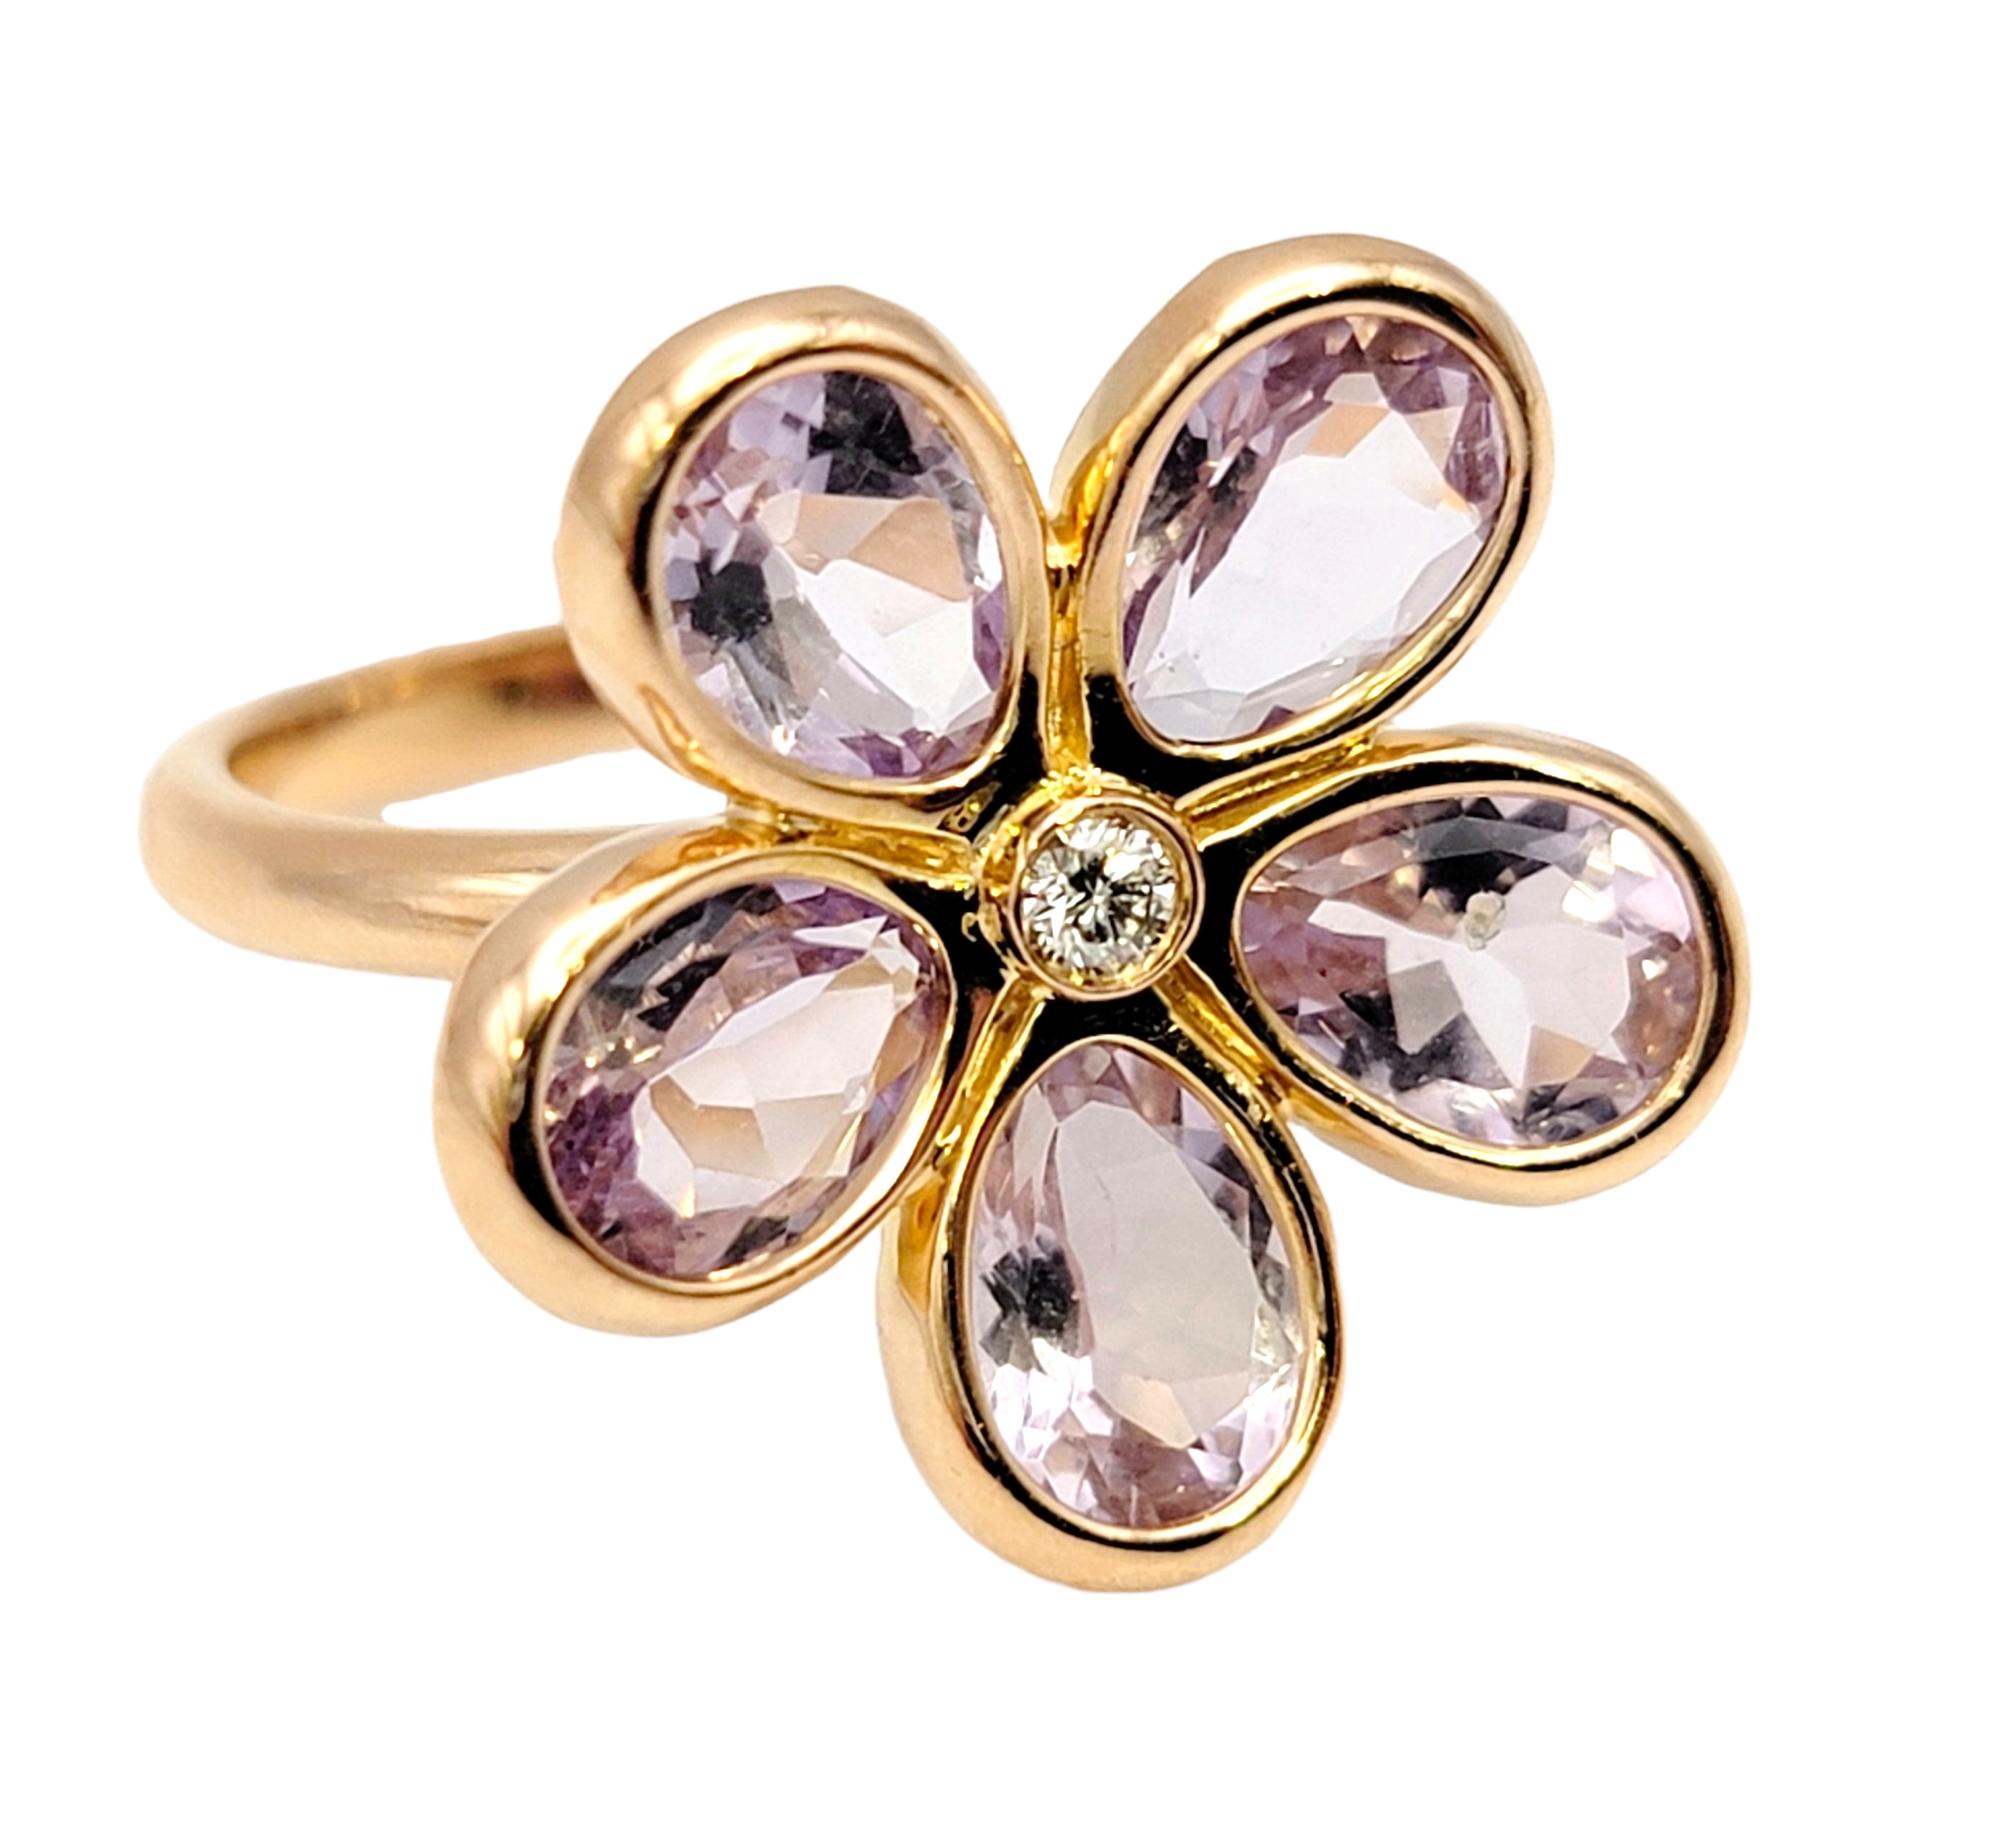 Contemporary Tiffany & Co. Amethyst and Diamond Sparklers Flower Ring in 18 Karat Rose Gold